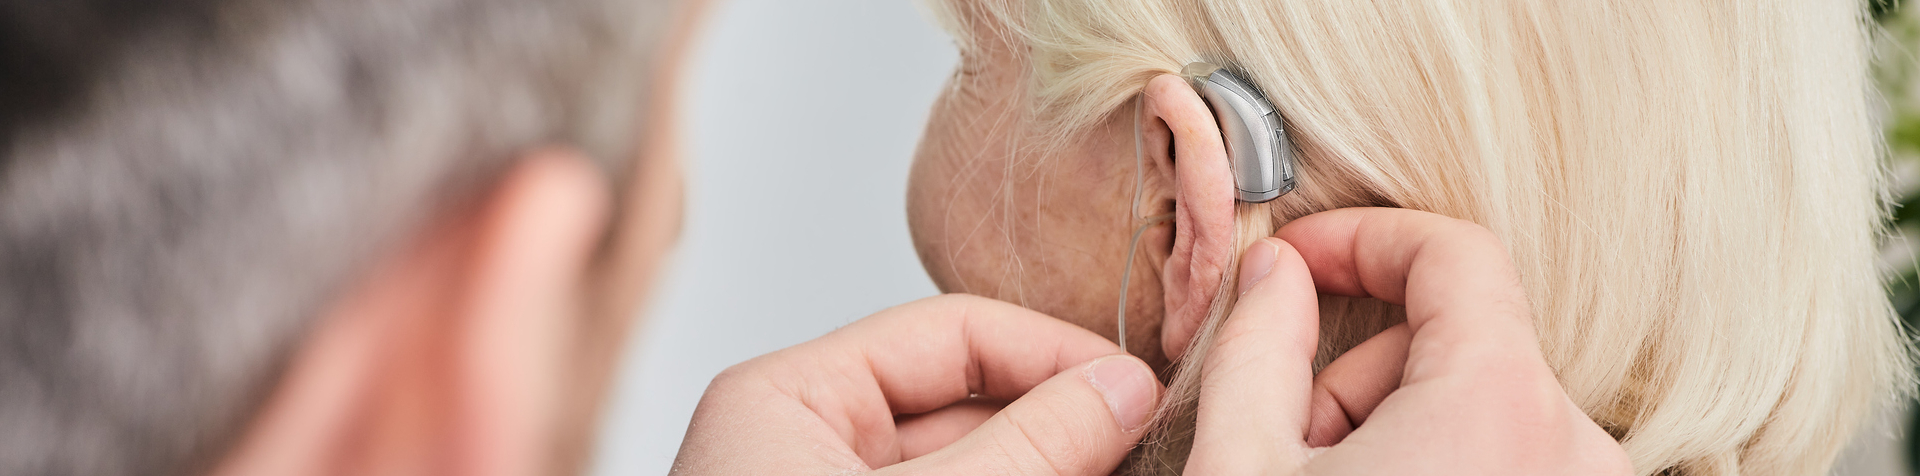 hearing loss prevention